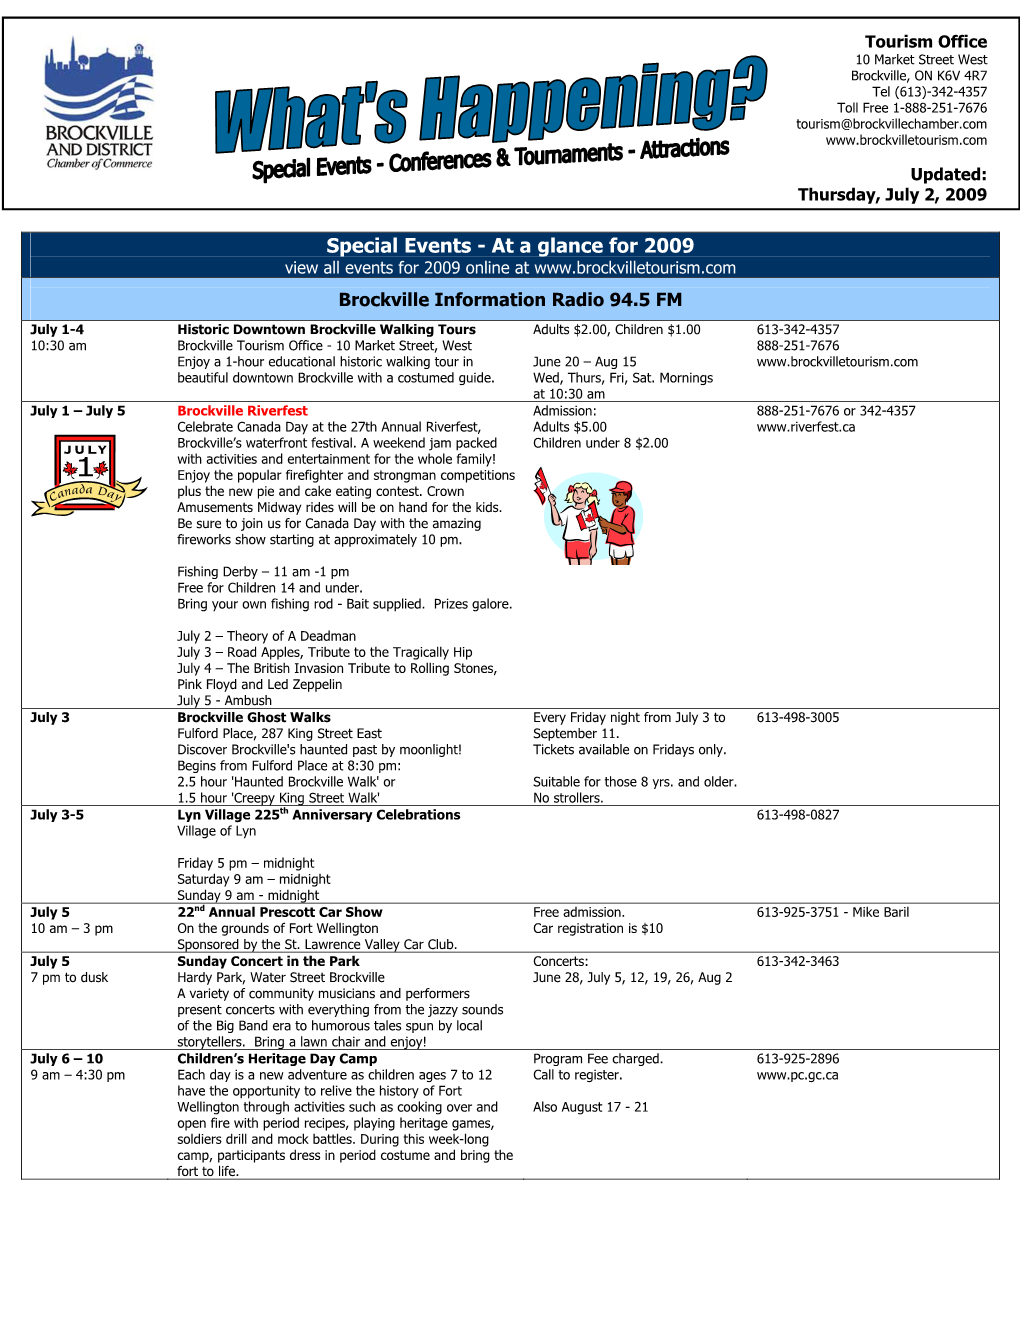 Special Events - at a Glance for 2009 View All Events for 2009 Online At